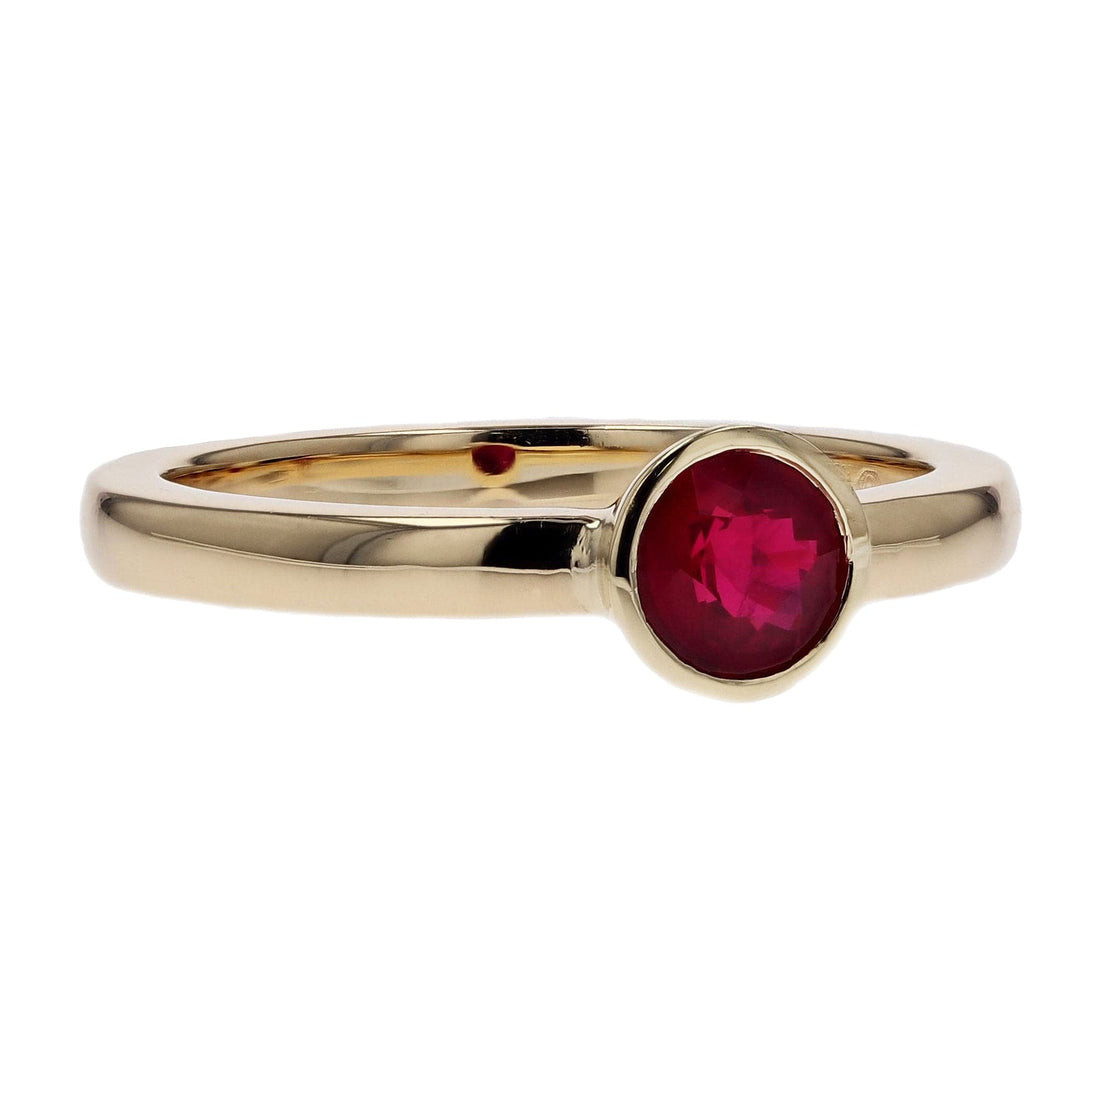 Precision Set Yellow Gold Bezel Set Ruby Engagement Ring - Skeie's Jewelers